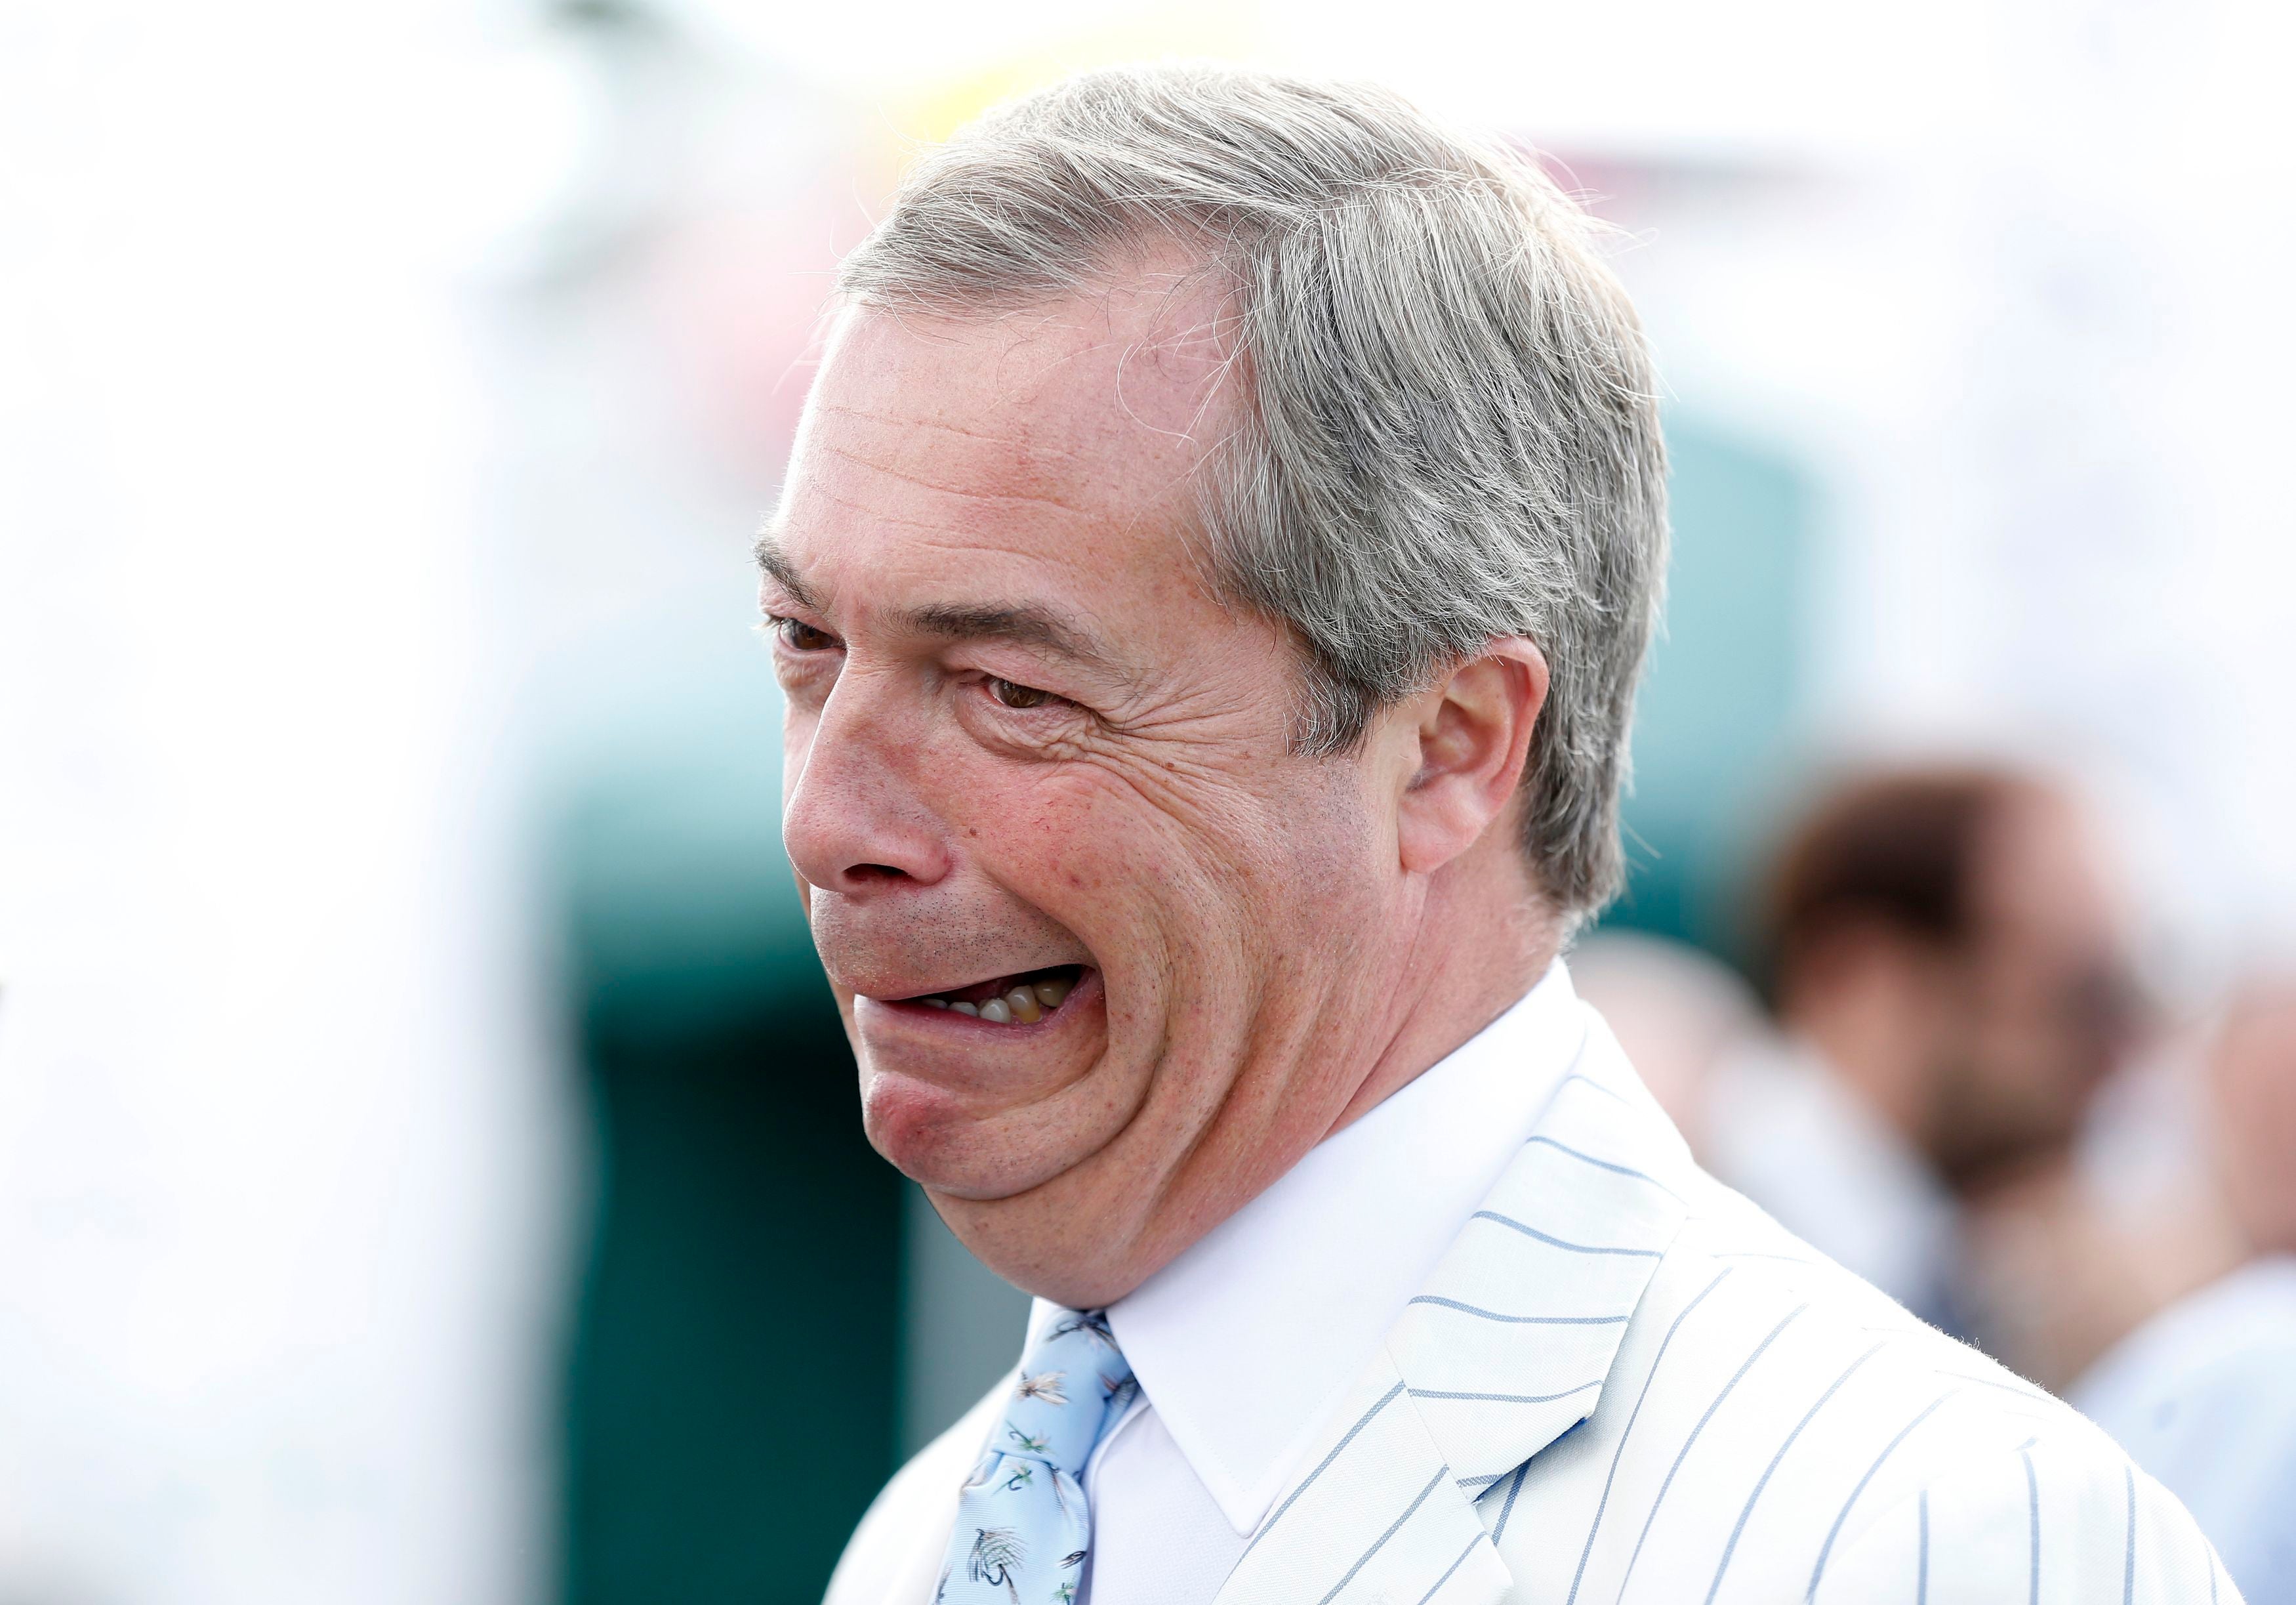 Nigel Farage mocked David Cameron over allegations he put his genitals in a dead pig's mouth while at university